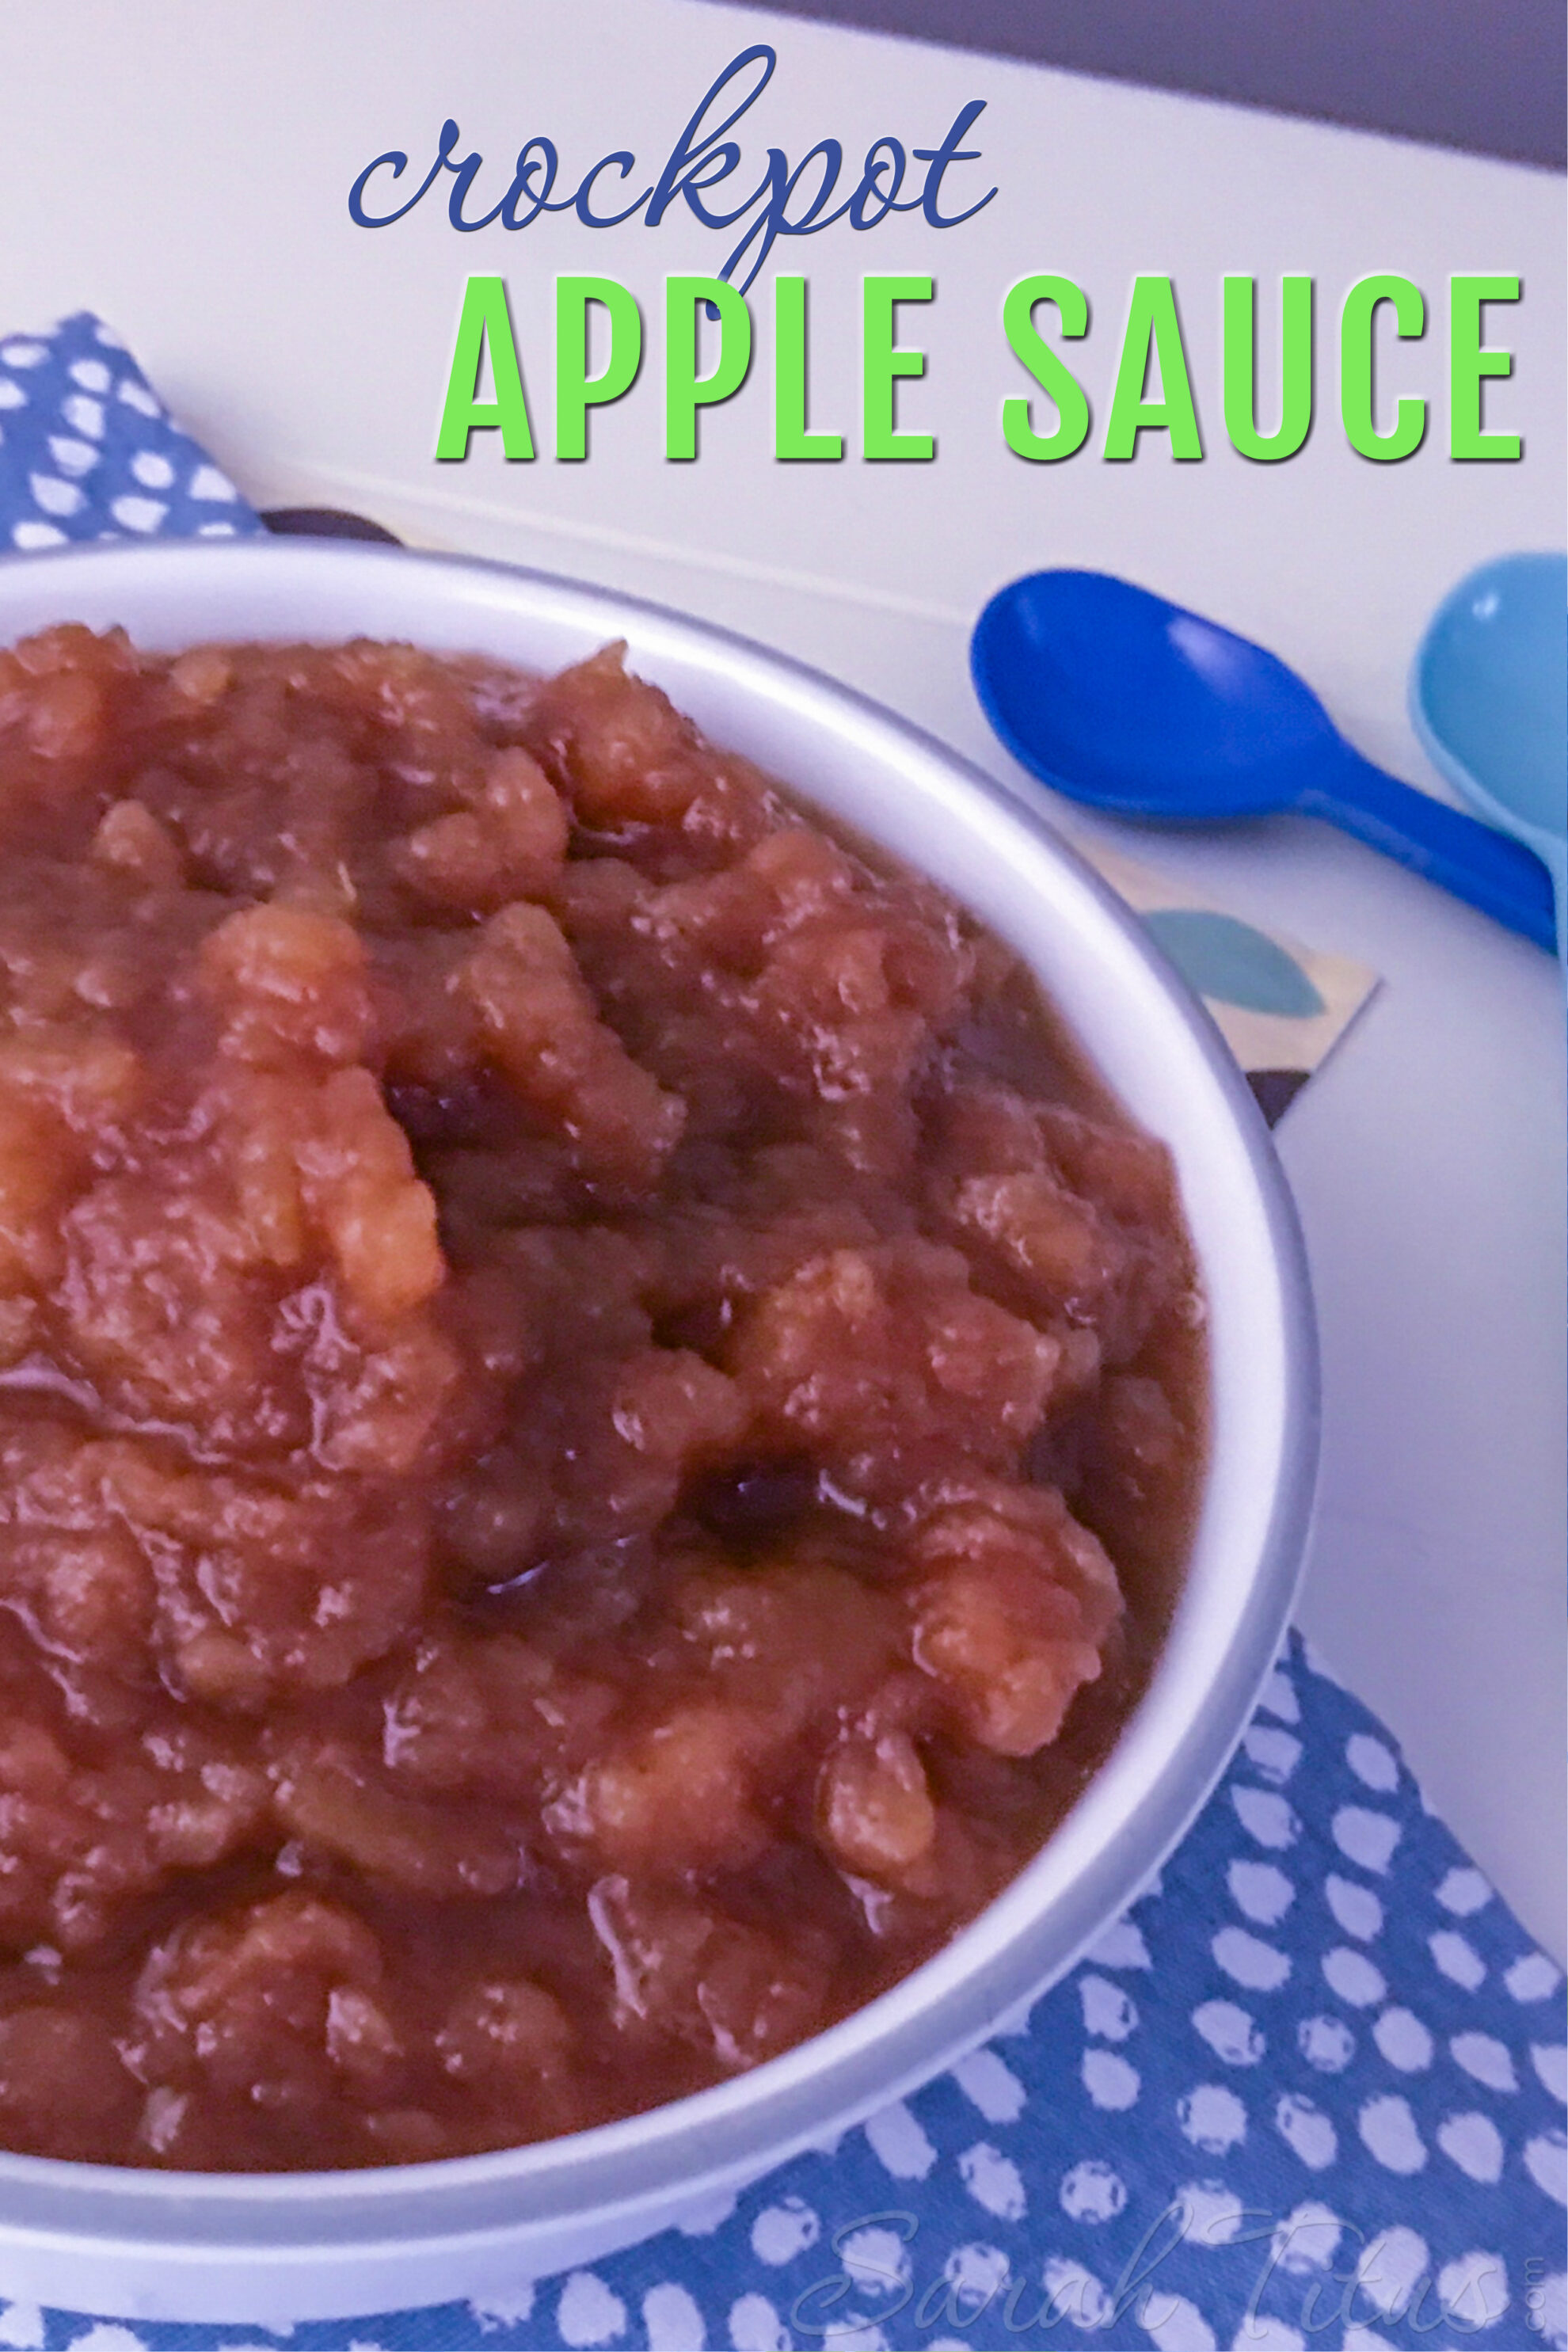 If you have never made crockpot applesauce before, you need to try this! It is so easy and delicious!